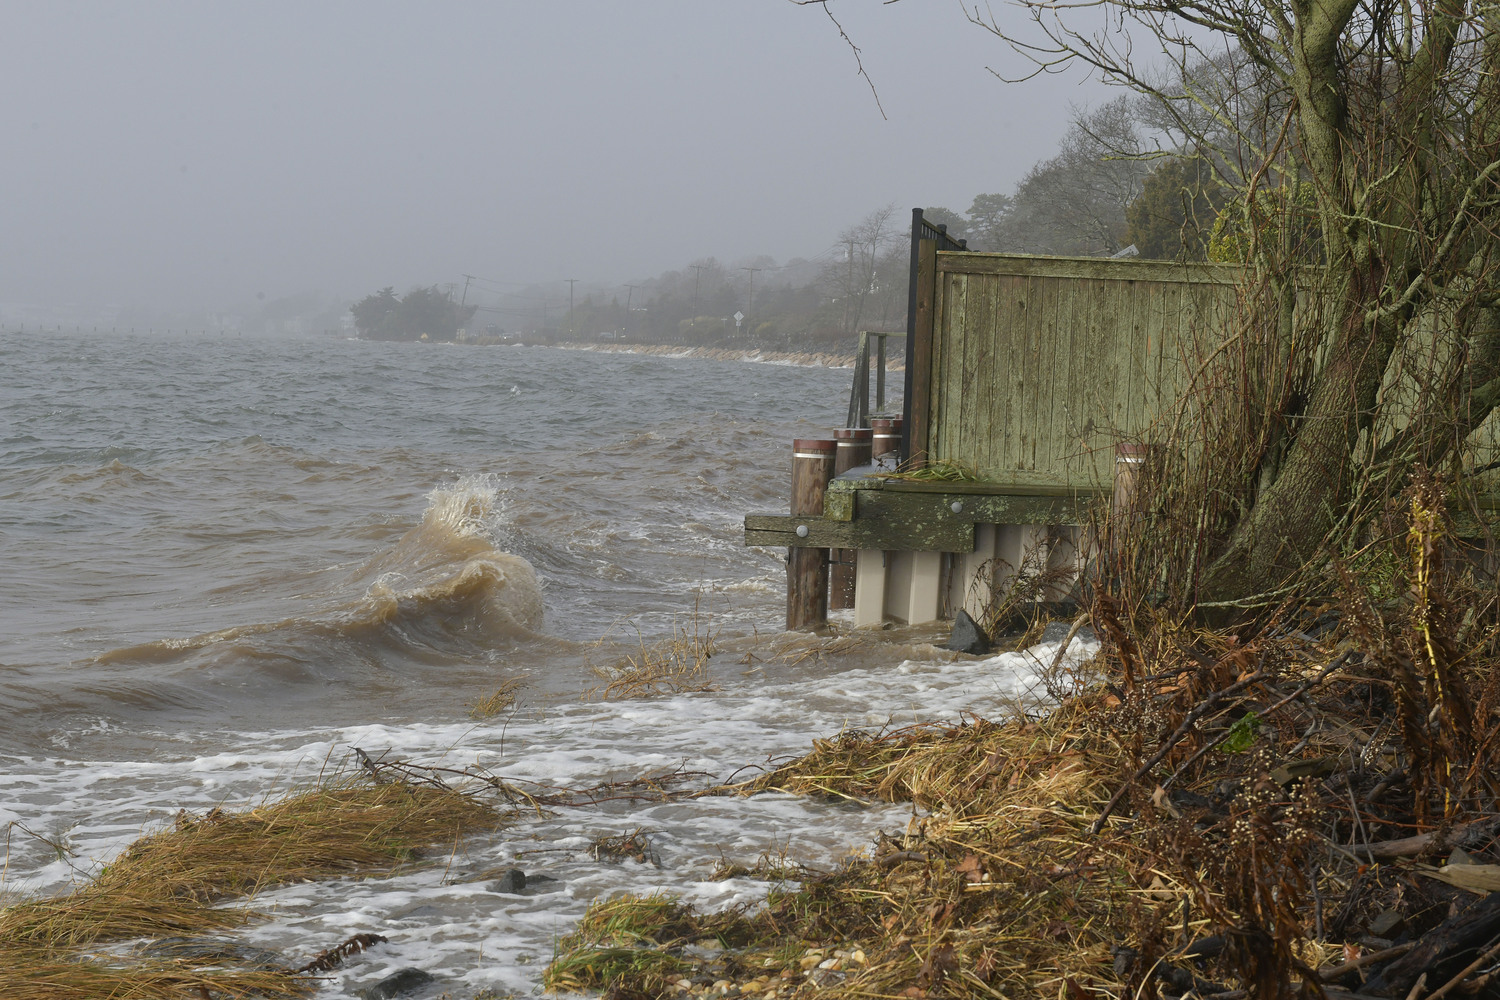 The region continues to be battered by storms causing major erosion in some areas.   DANA SHAW